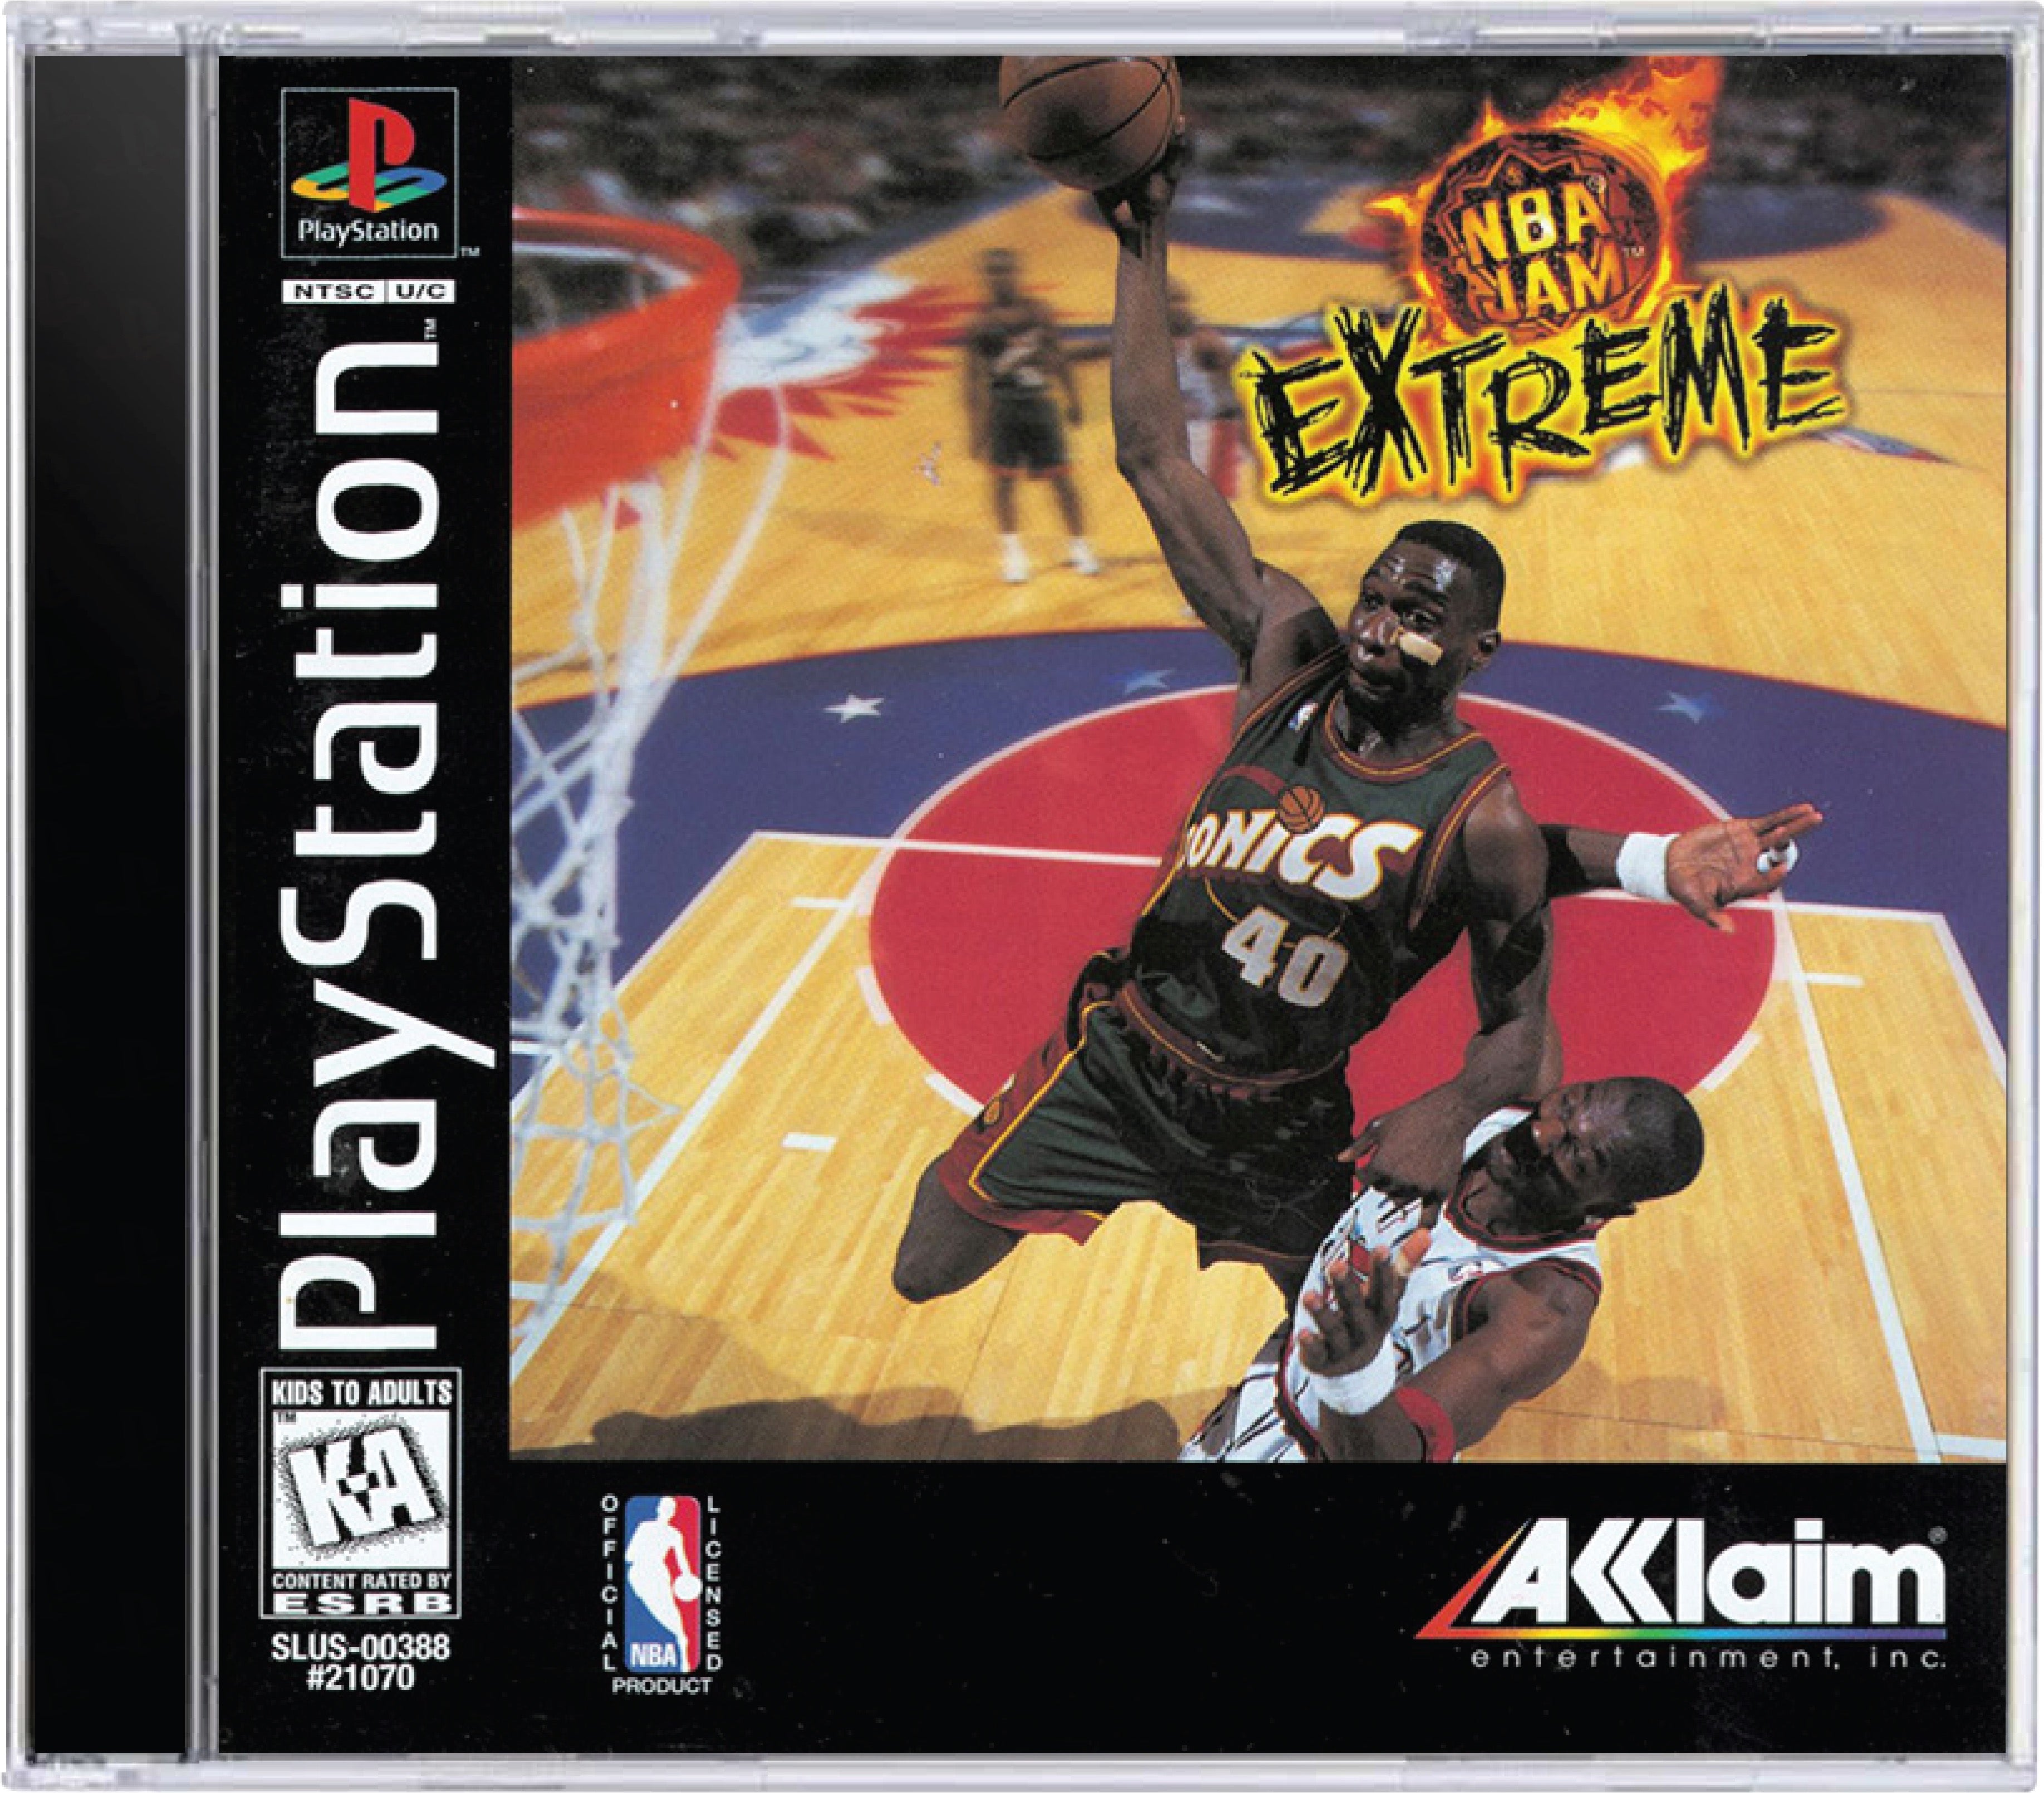 NBA Jam Extreme Cover Art and Product Photo